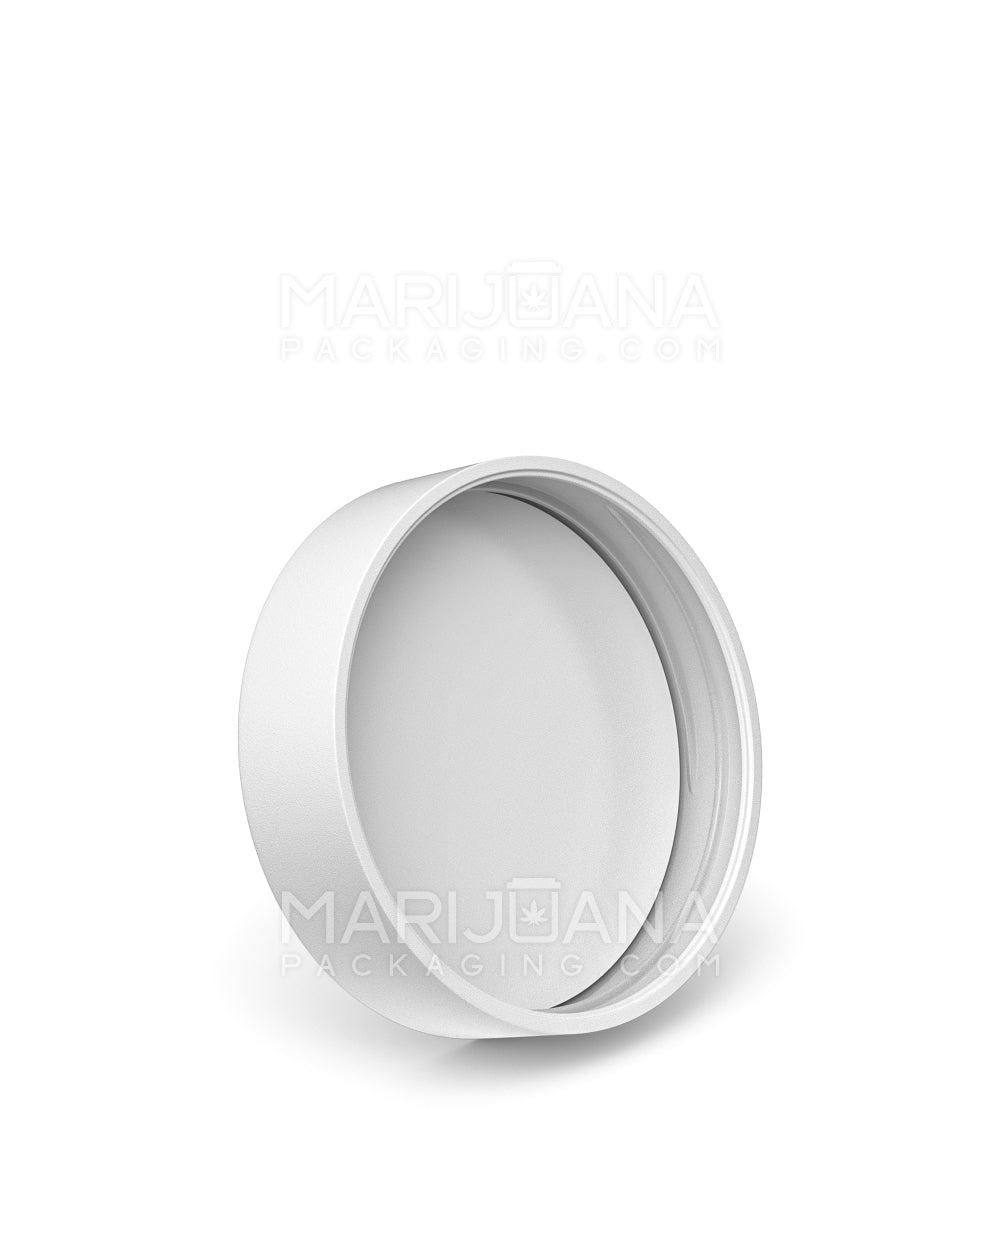 Child Resistant | Smooth Push Down & Turn Plastic Caps w/ Foam Liner | 53mm - Matte White - 100 Count - 2